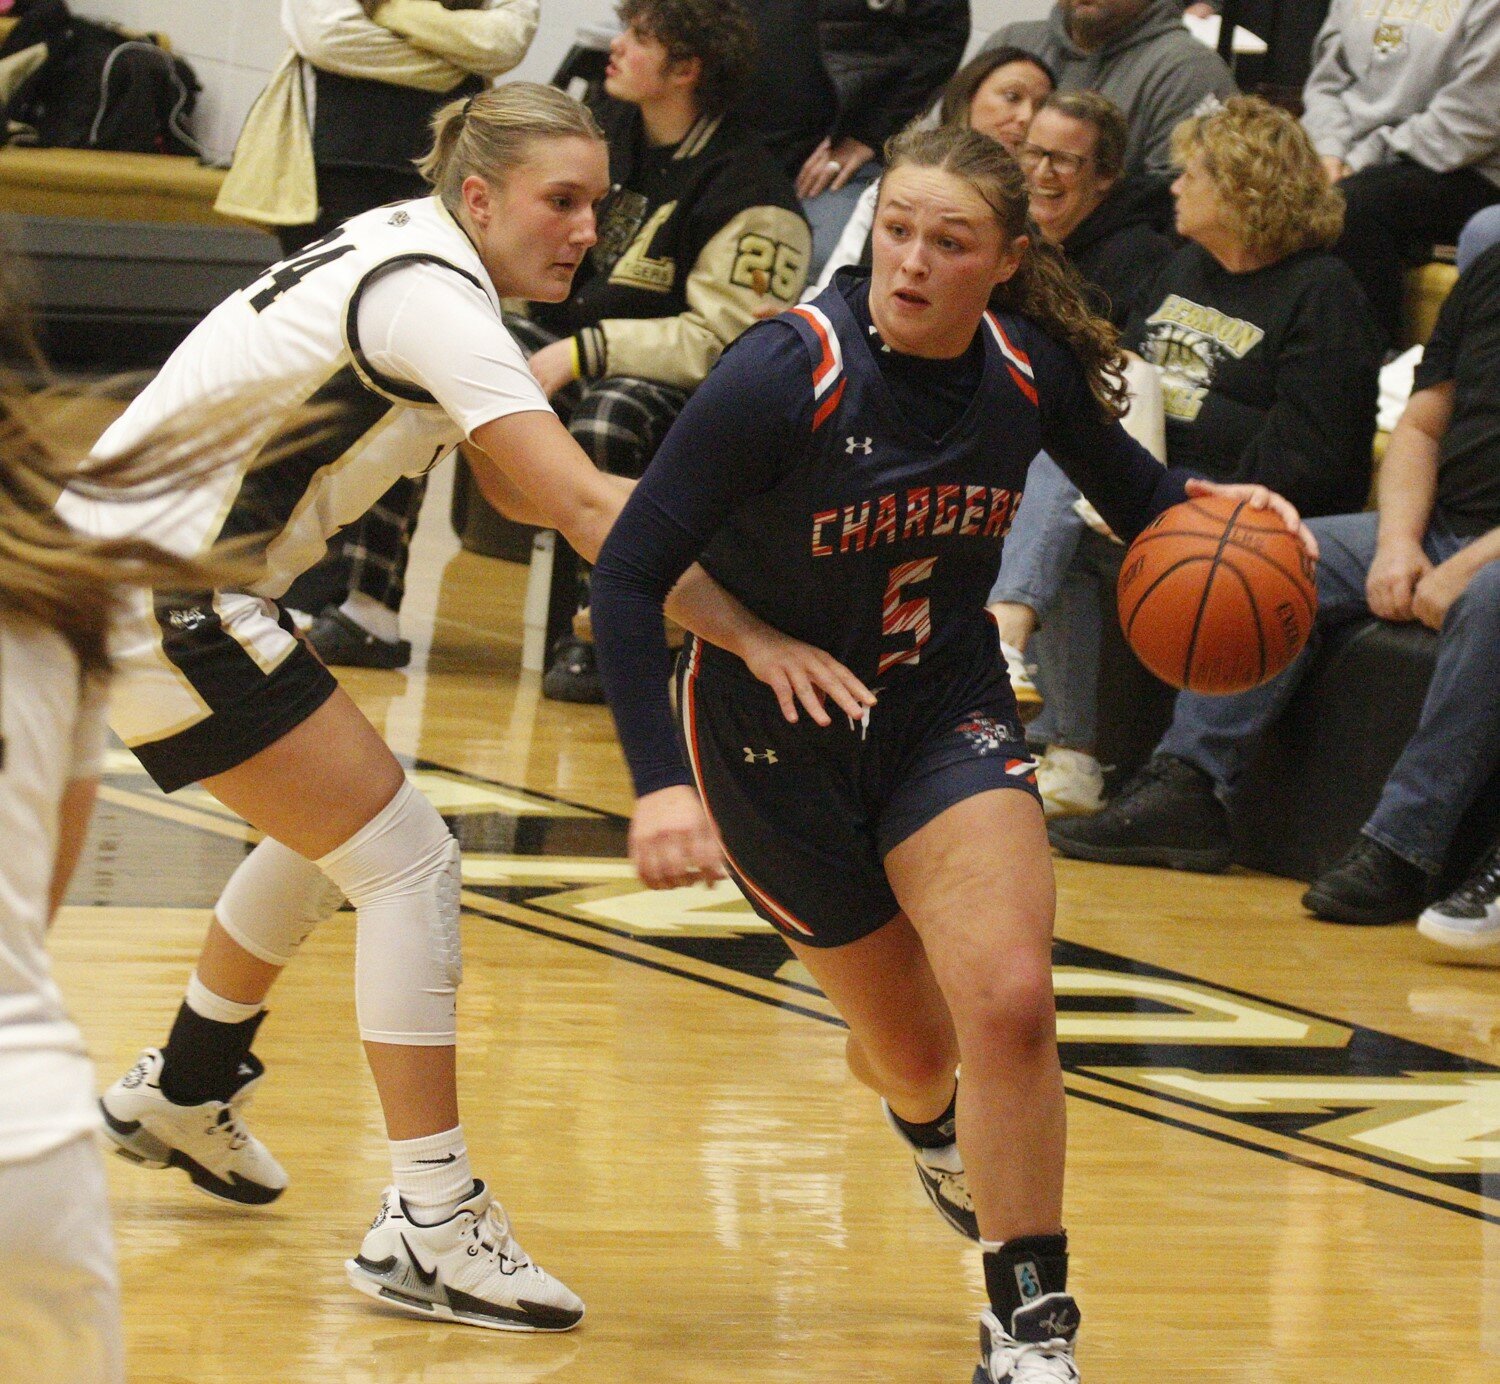 Charger junior Piper Ramey scored 10 points in the 40-28 loss to Lebanon.